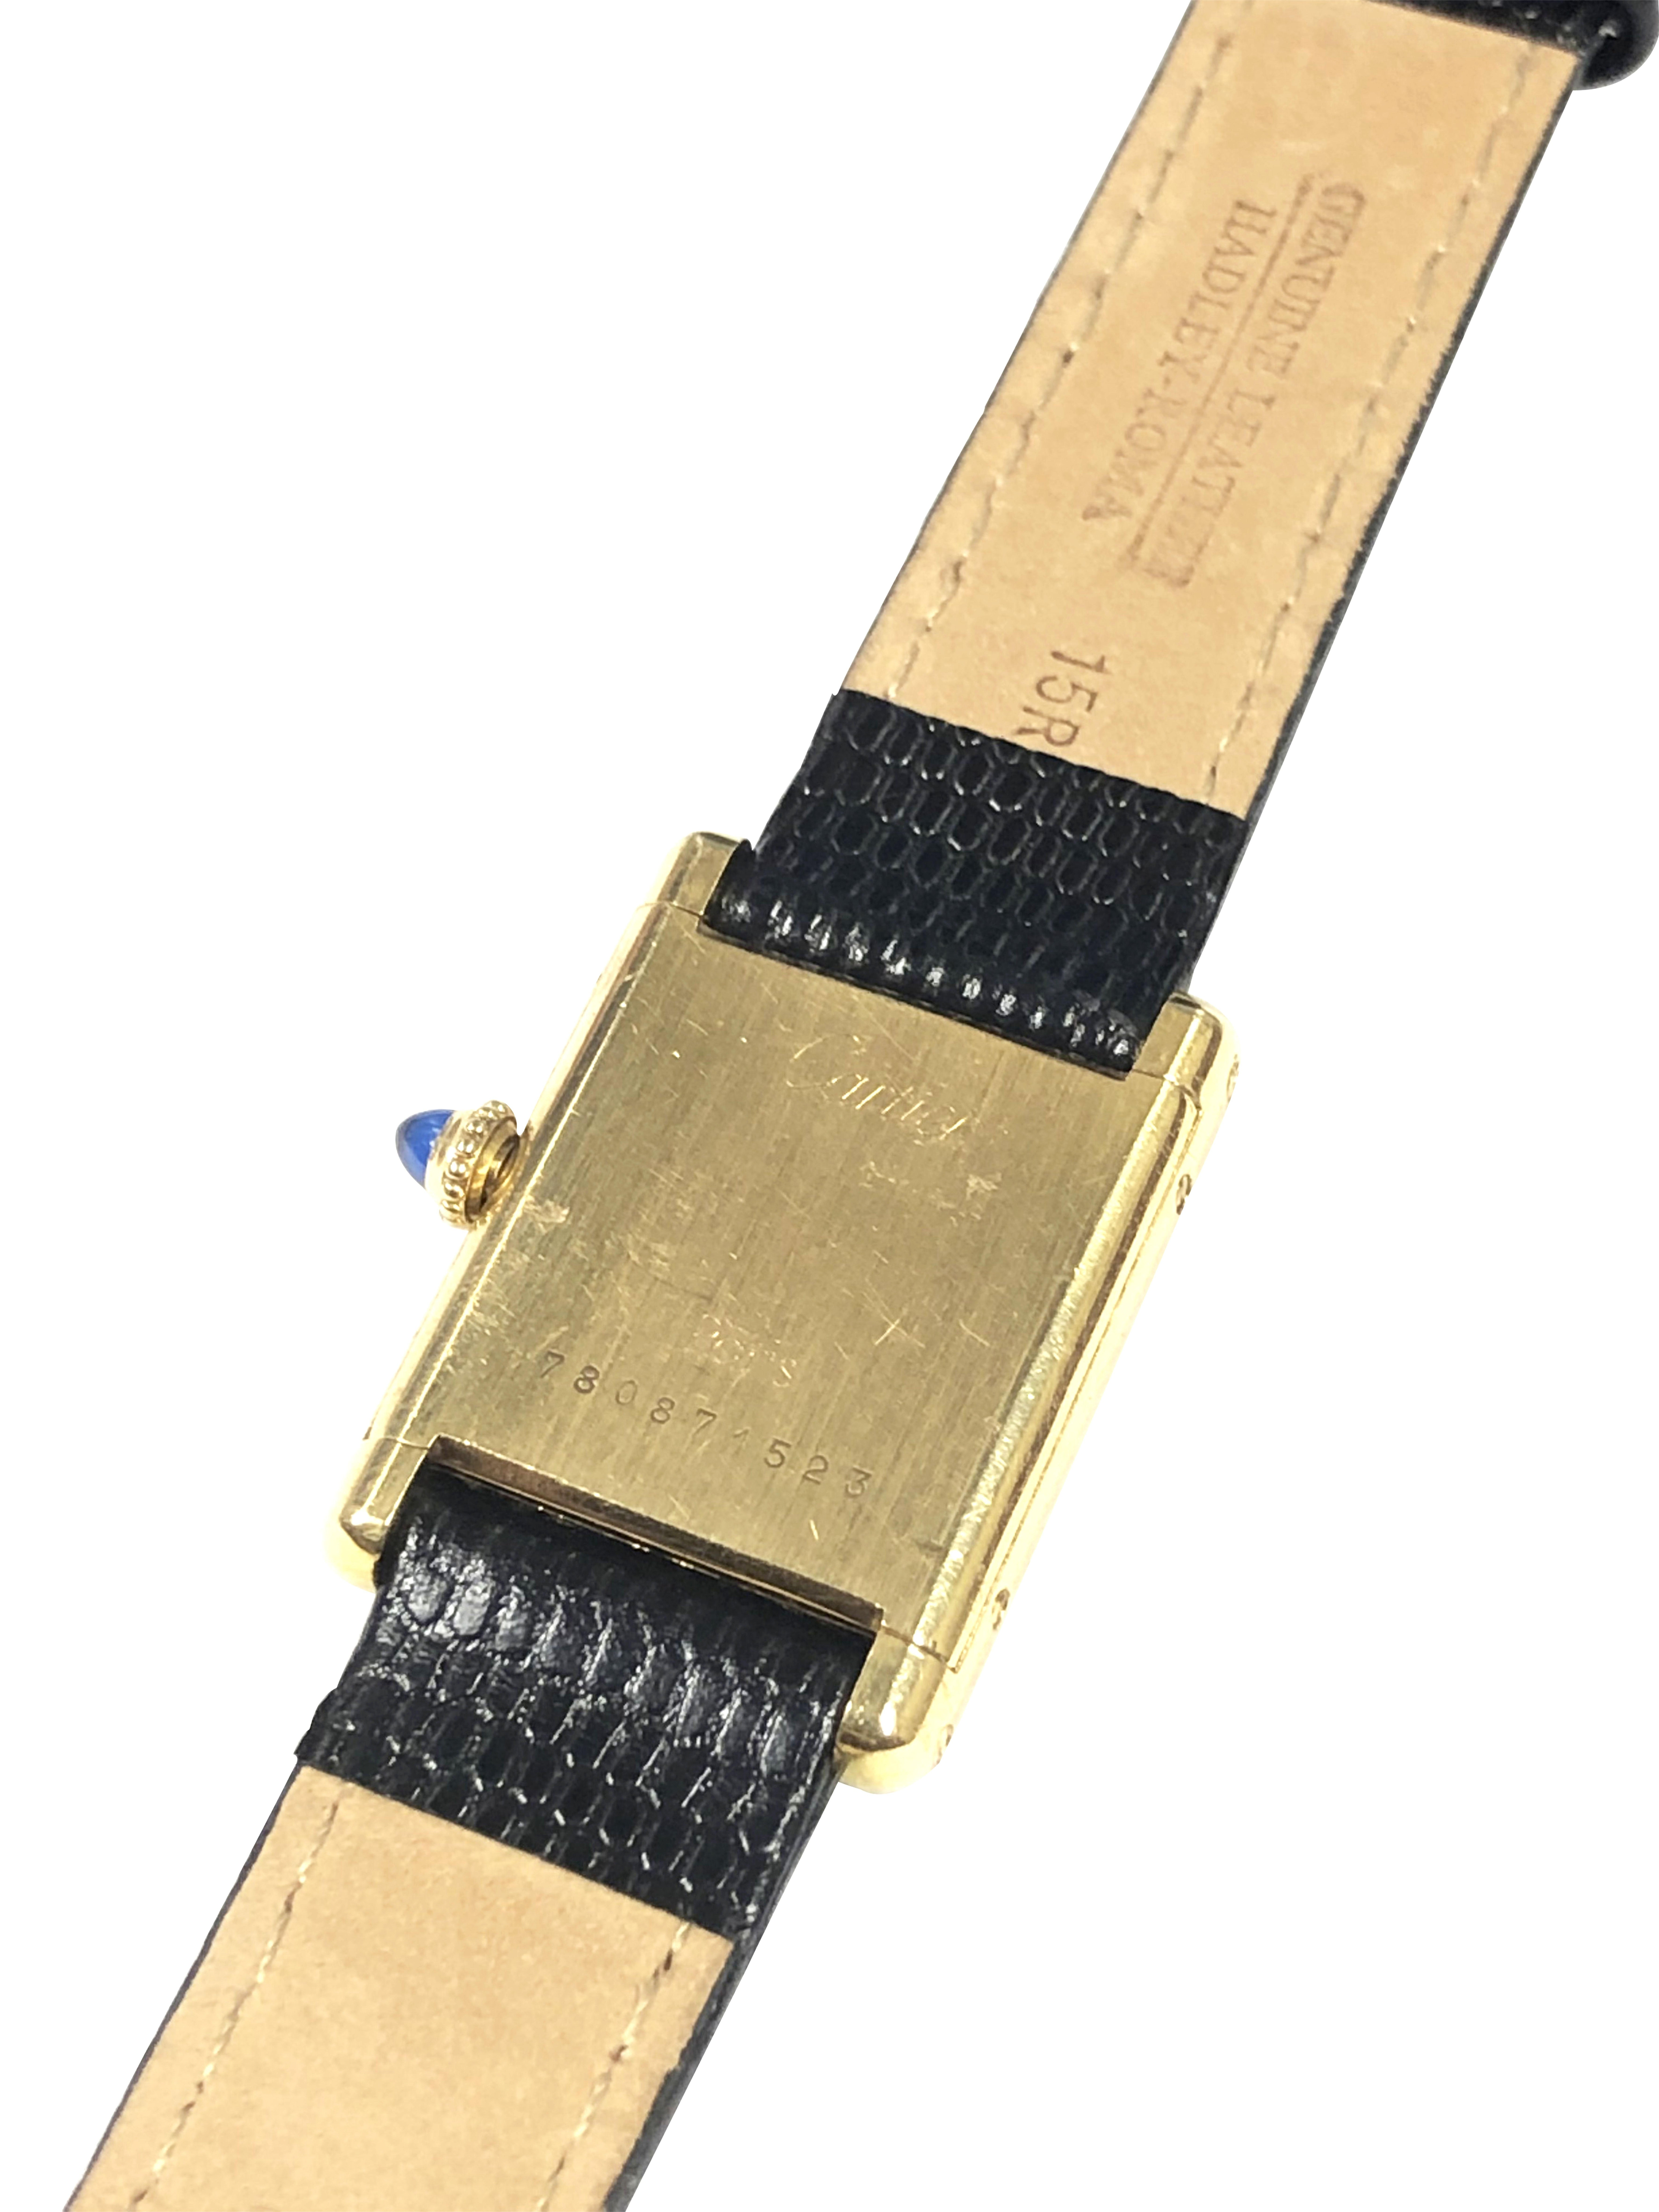 Circa 1980 Cartier Ladies Classic Tank Wrist Watch, 28 X 20 MM 18K Yellow Gold case. Manual wind mechanical movement, Sapphire crown, White dial with Black Roman Numerals. New Black Hadley Roma Lizard Strap with Cartier Gold Plate Tang Buckle. Watch